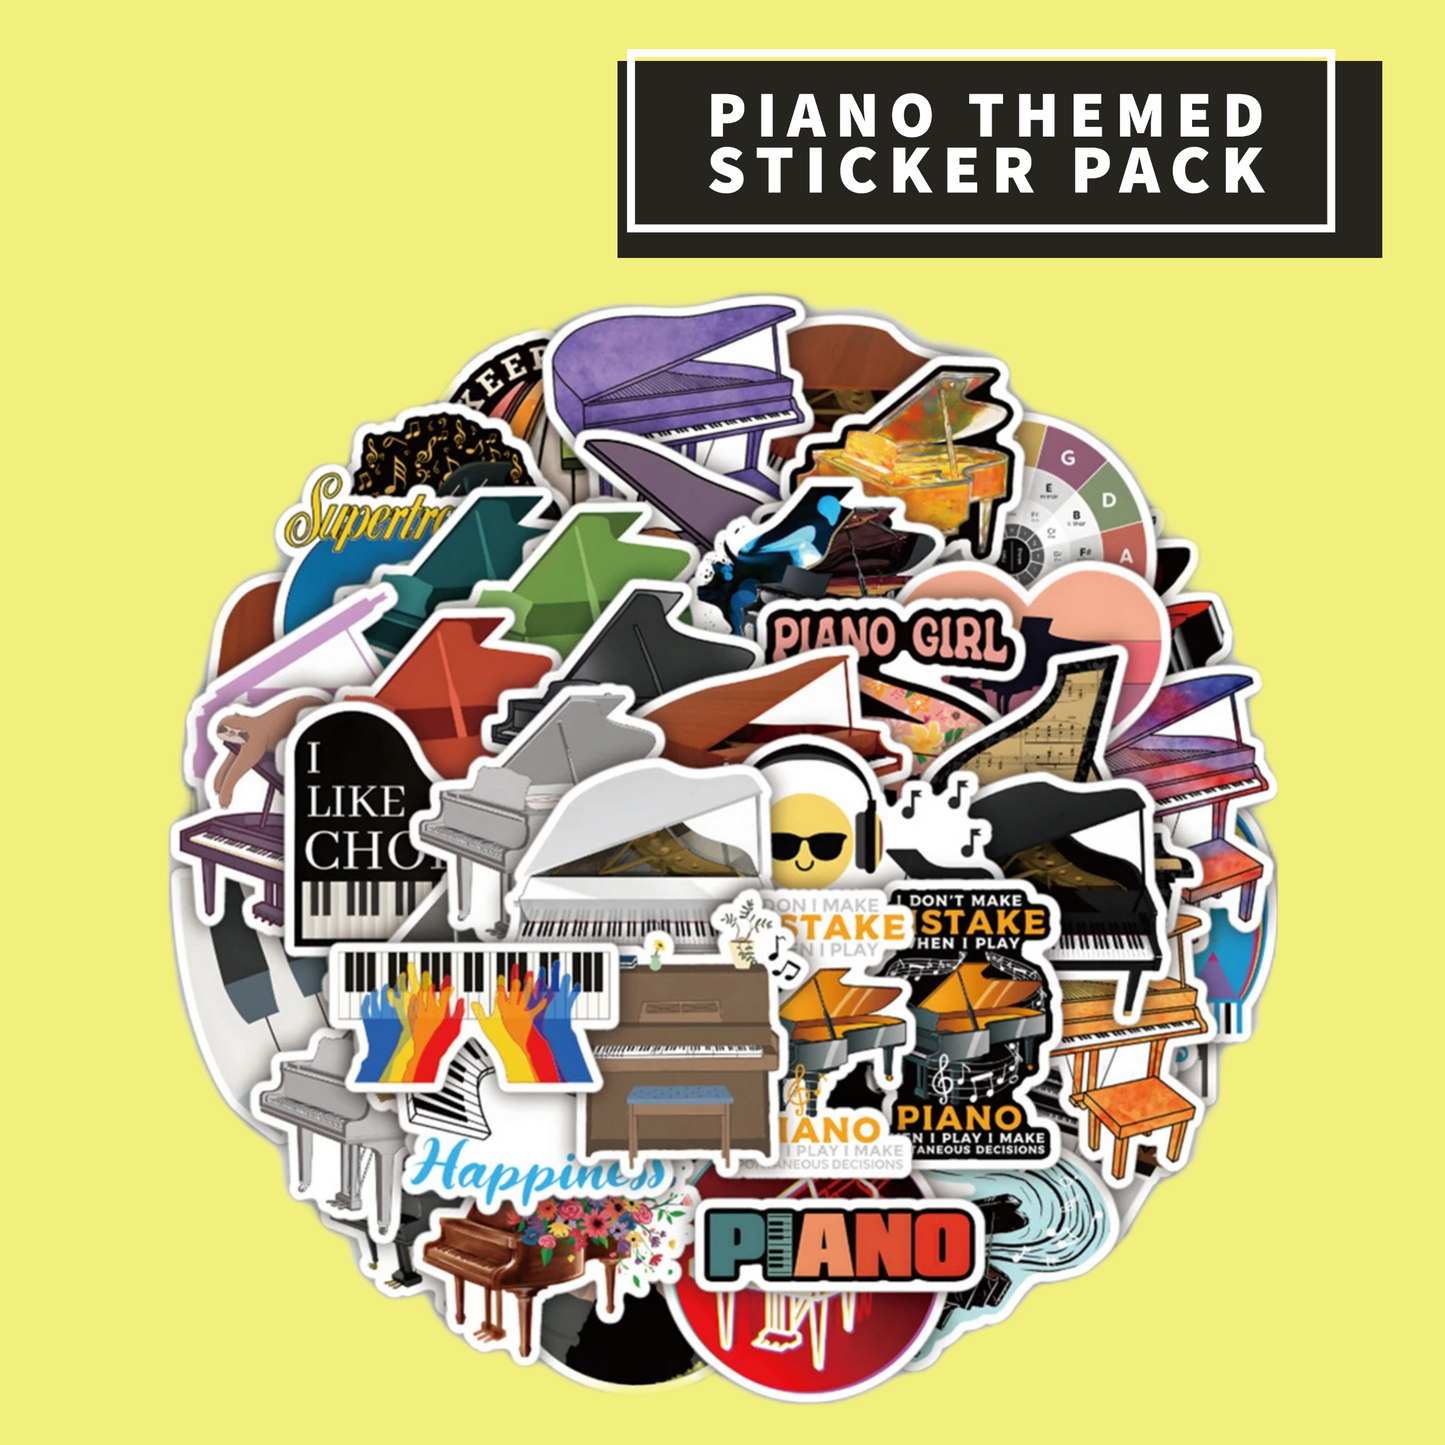 Piano Themed Sticker Pack (20 pieces)